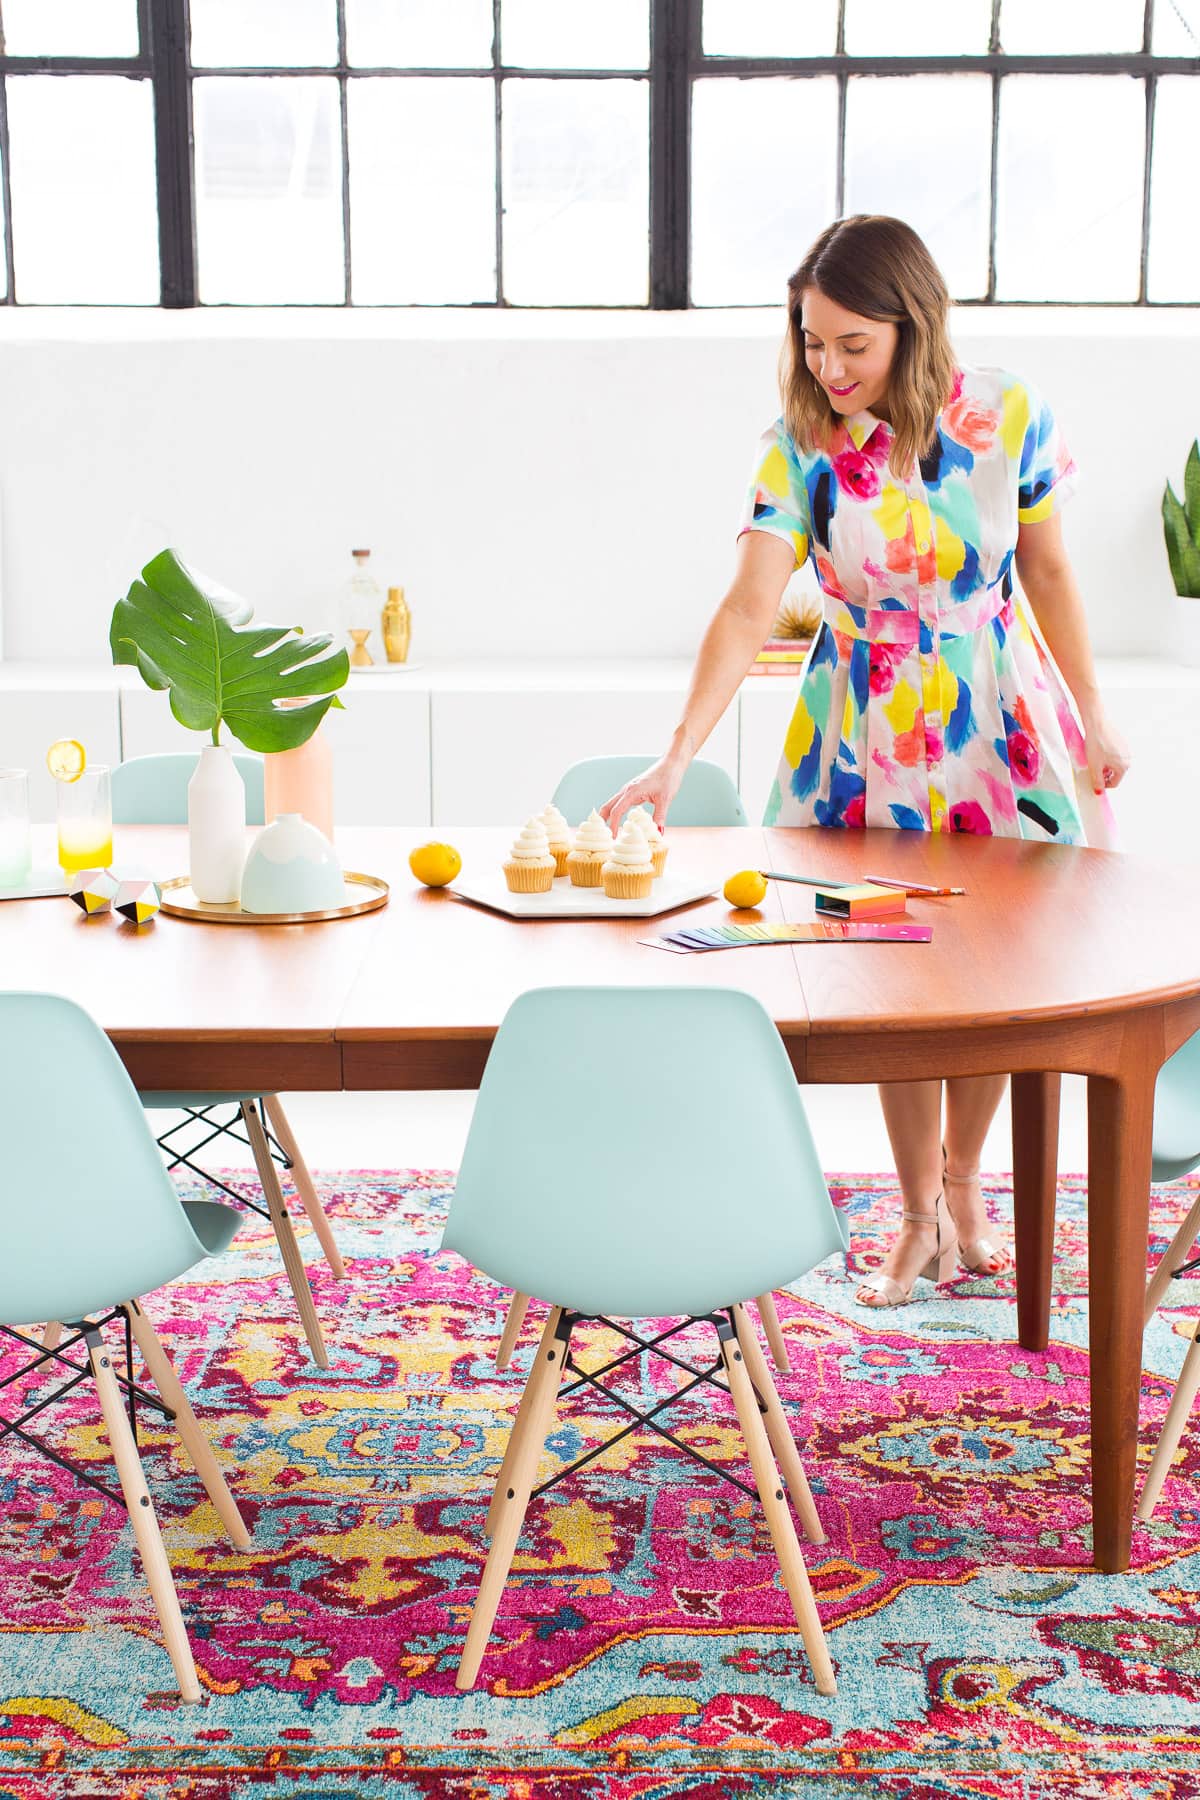 How decorate a joyful and modern dining room for Summer! - sugar and cloth - ashley rose - houston blogger